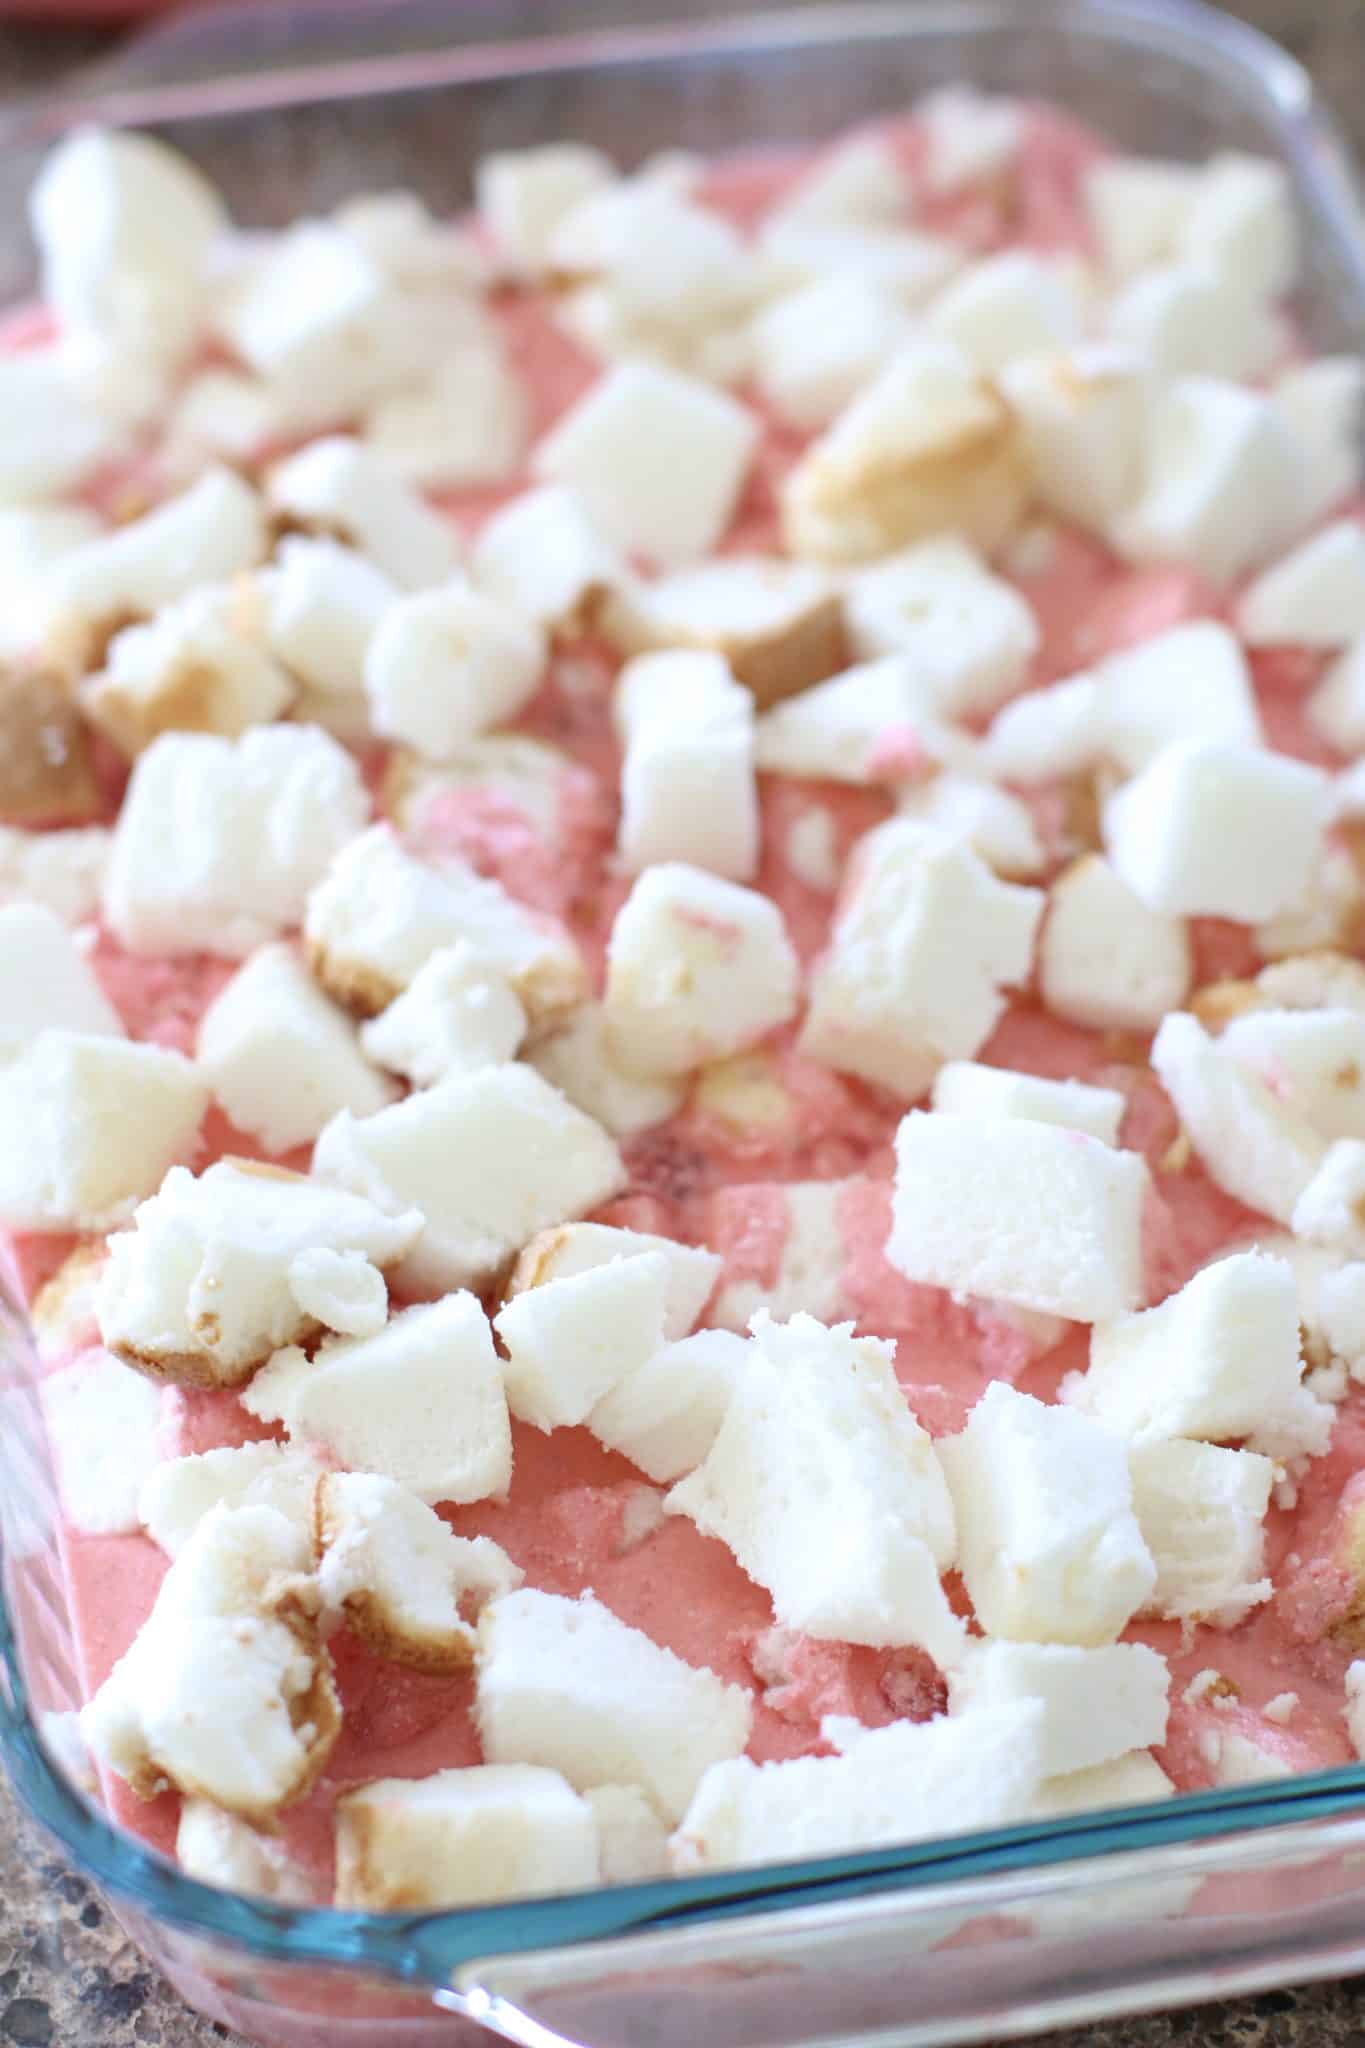 a layer of diced angel food cake spread out evenly on top strawberry gelatin mixture in baking dish.